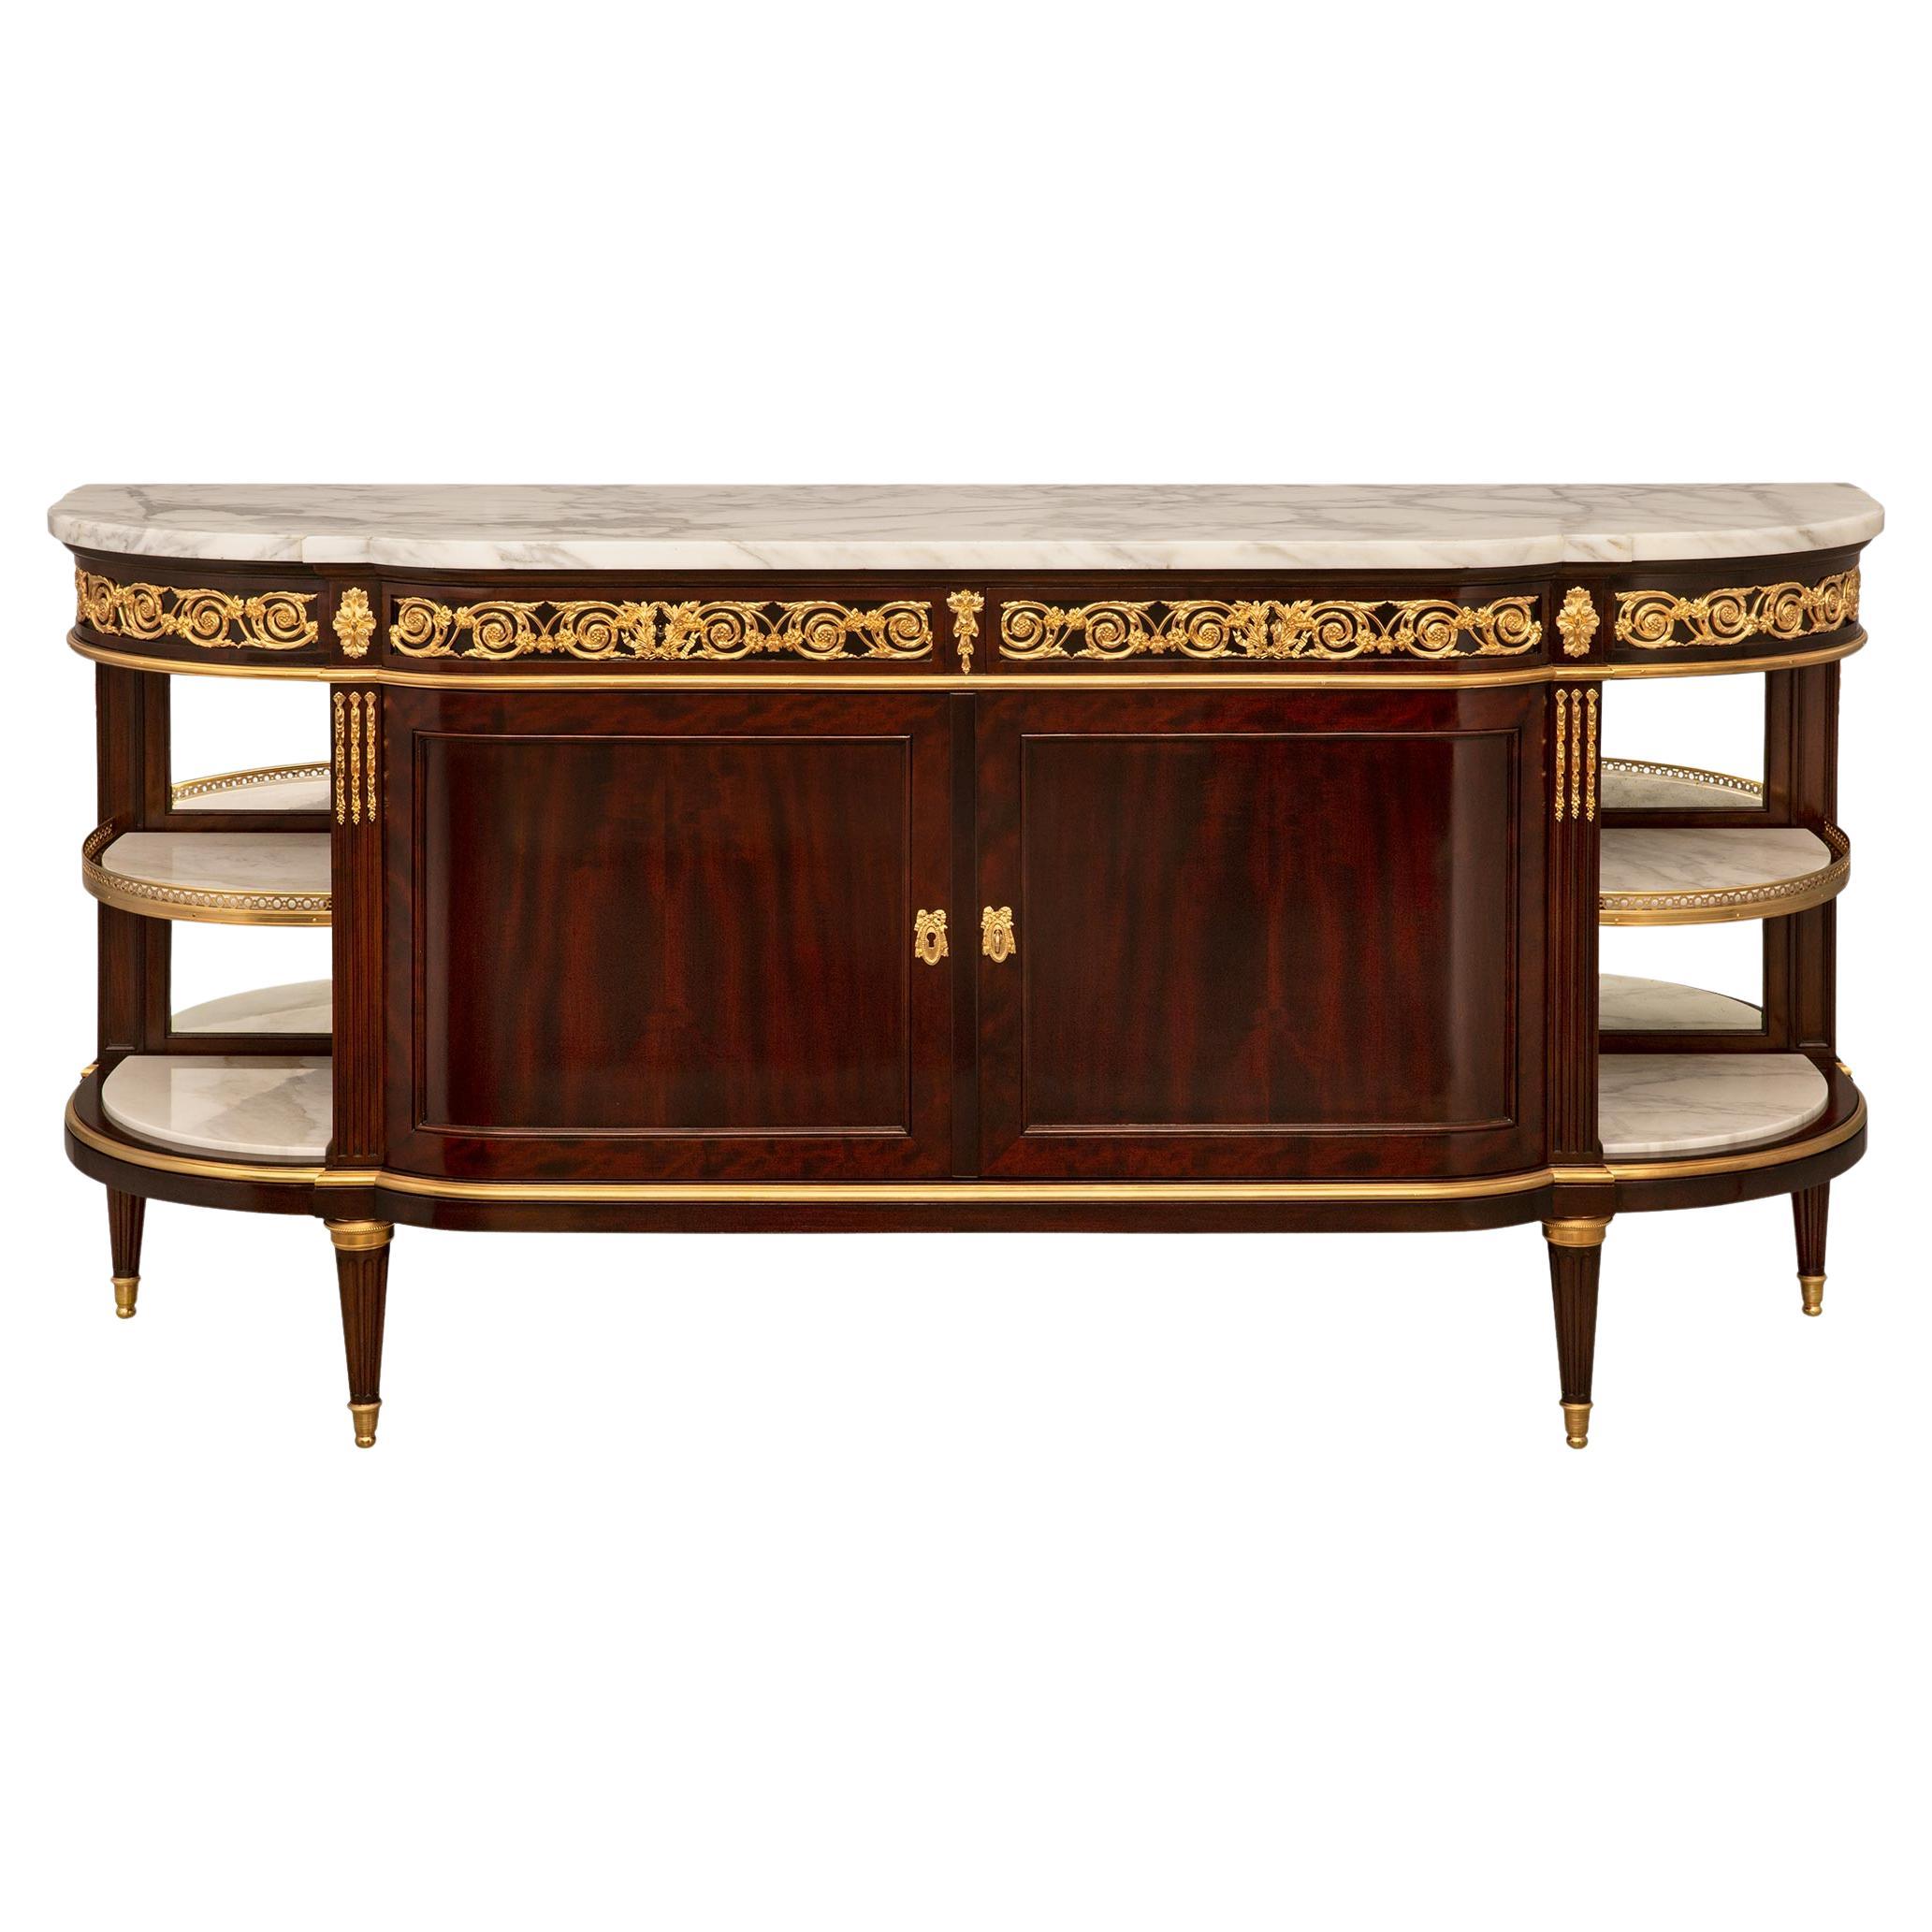 A French 19th century Louis XVI st. Belle Époque buffet signed by Paul Somani